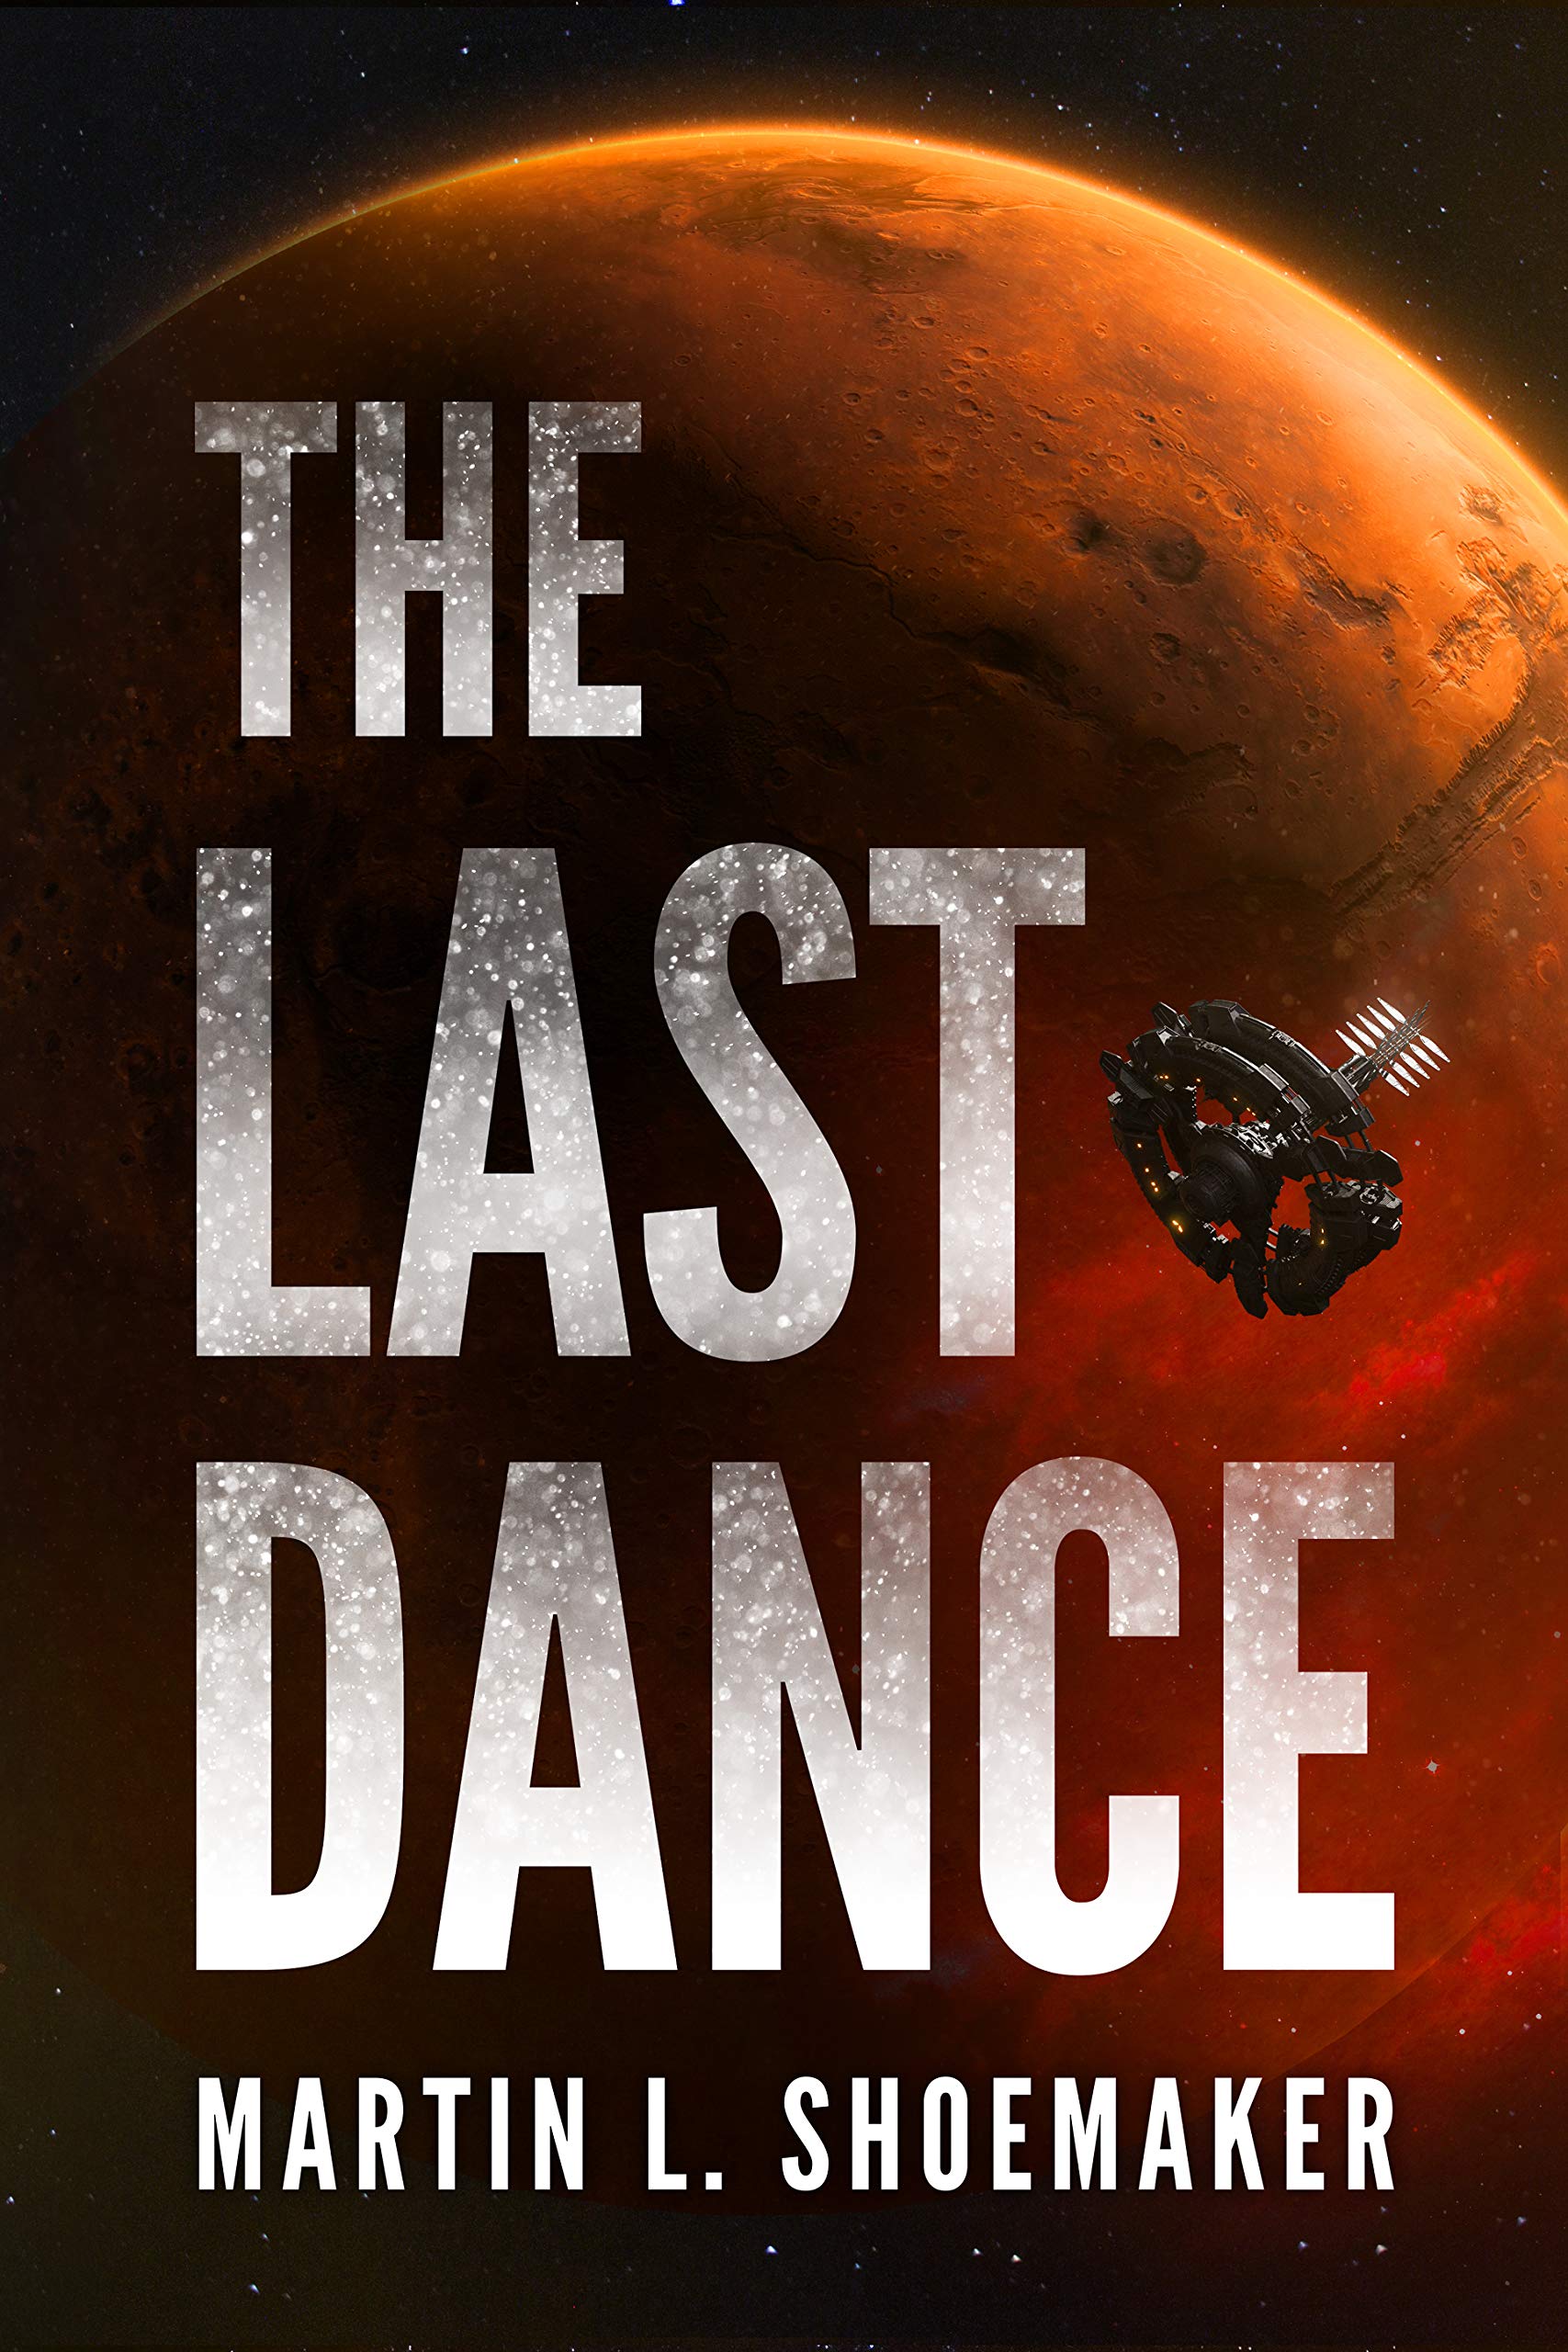 Image for "The Last Dance"